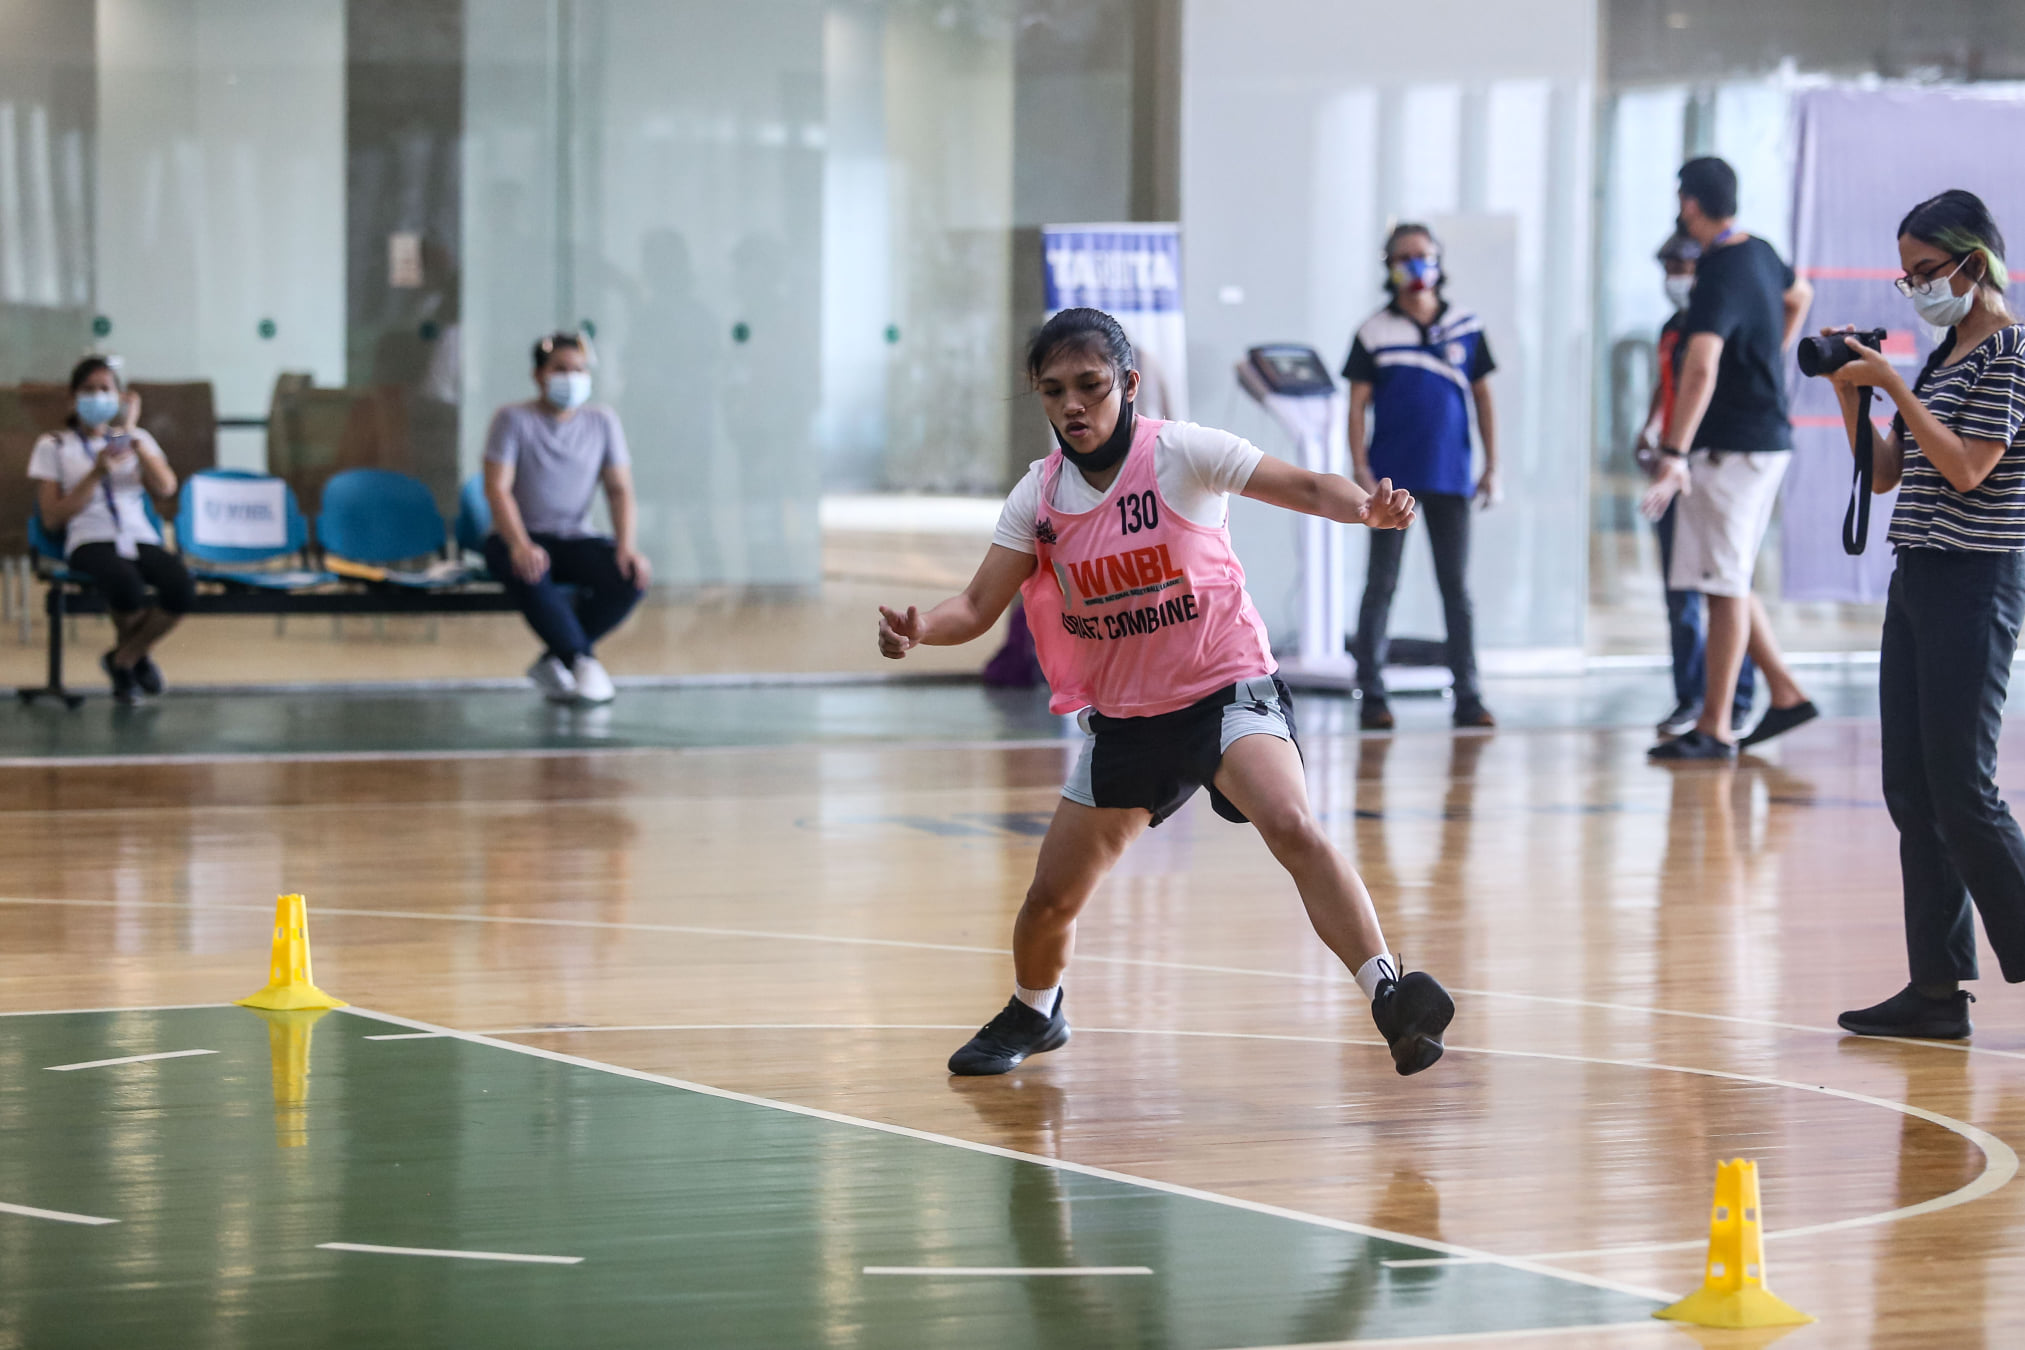 WNBL-Draft-Combine-Day-2-Dianne-Ventura Sthefanie Ventura tops two agility tests in WNBL Draft Combine Basketball NBL News  - philippine sports news